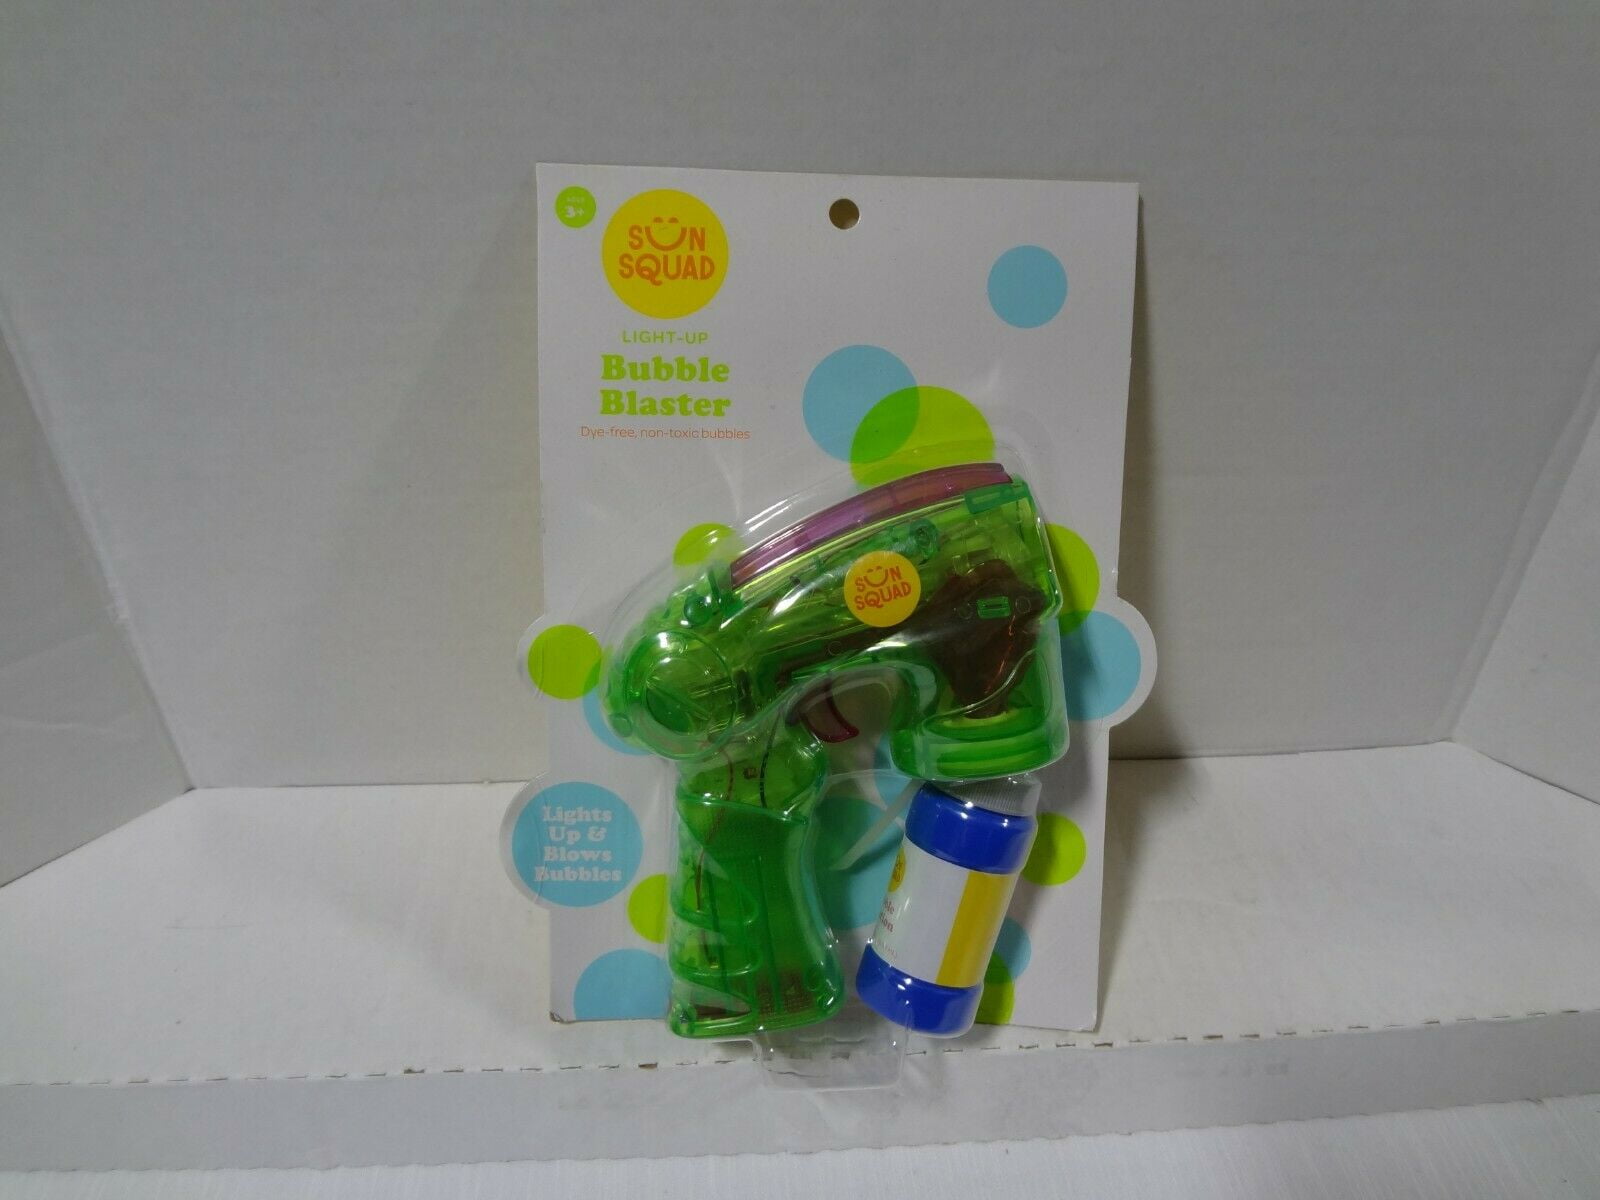 hours of fun for anyone! Green LED Light Up Refillable Bubble Wand 